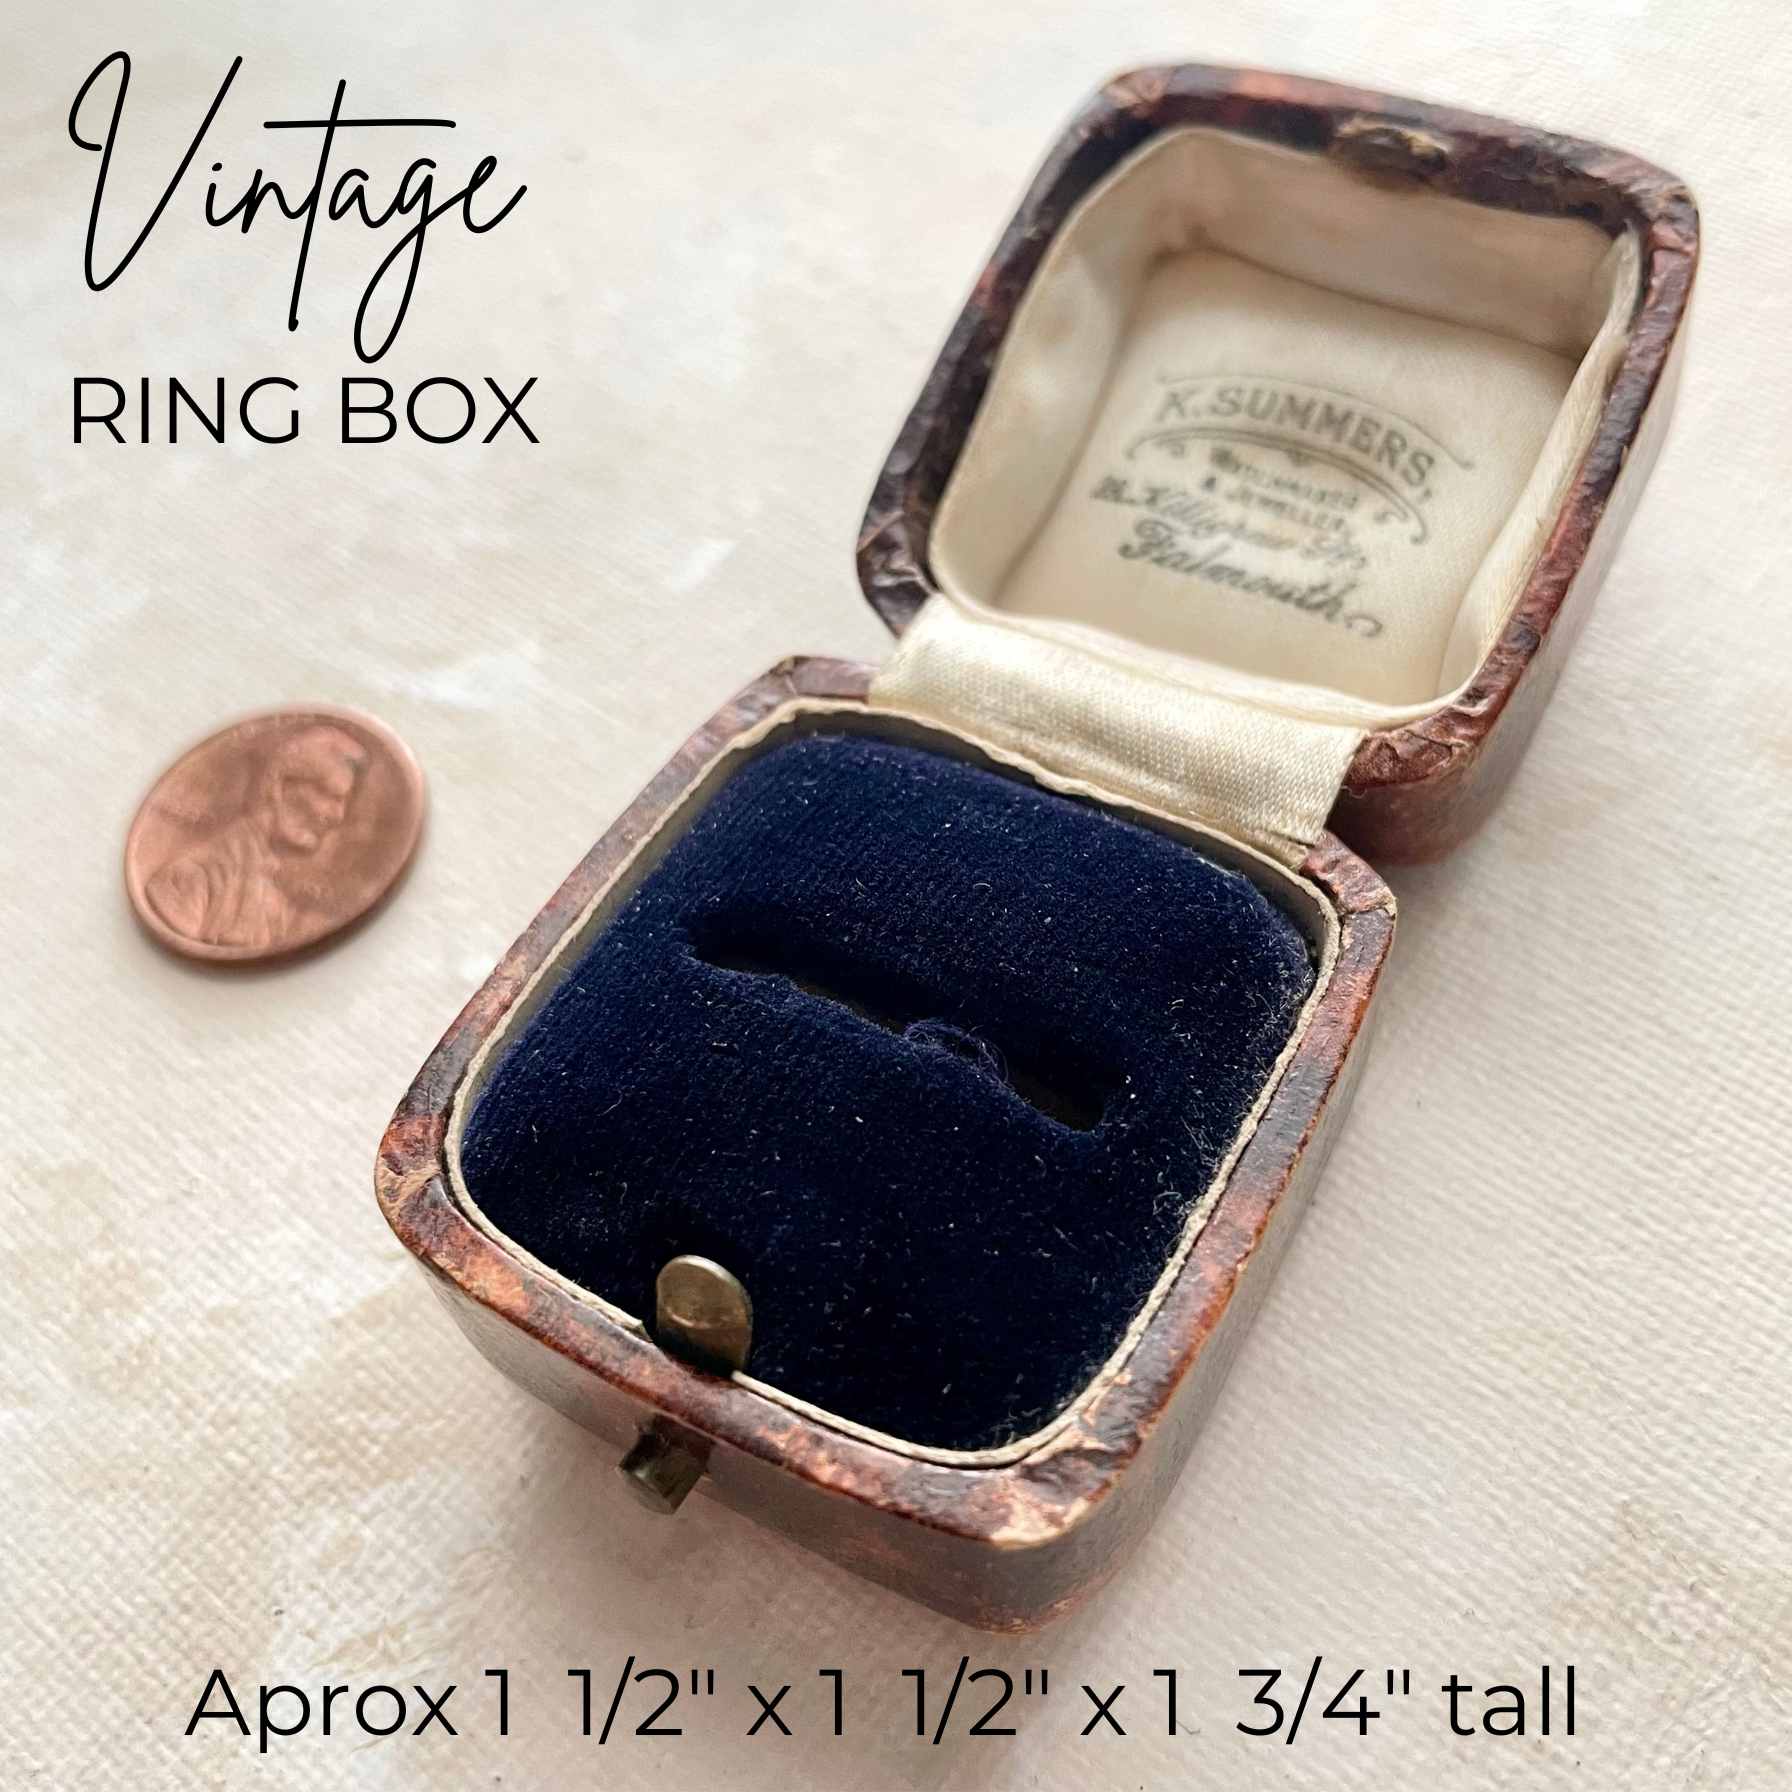 Vintage Ring Box - Classic K. Summers